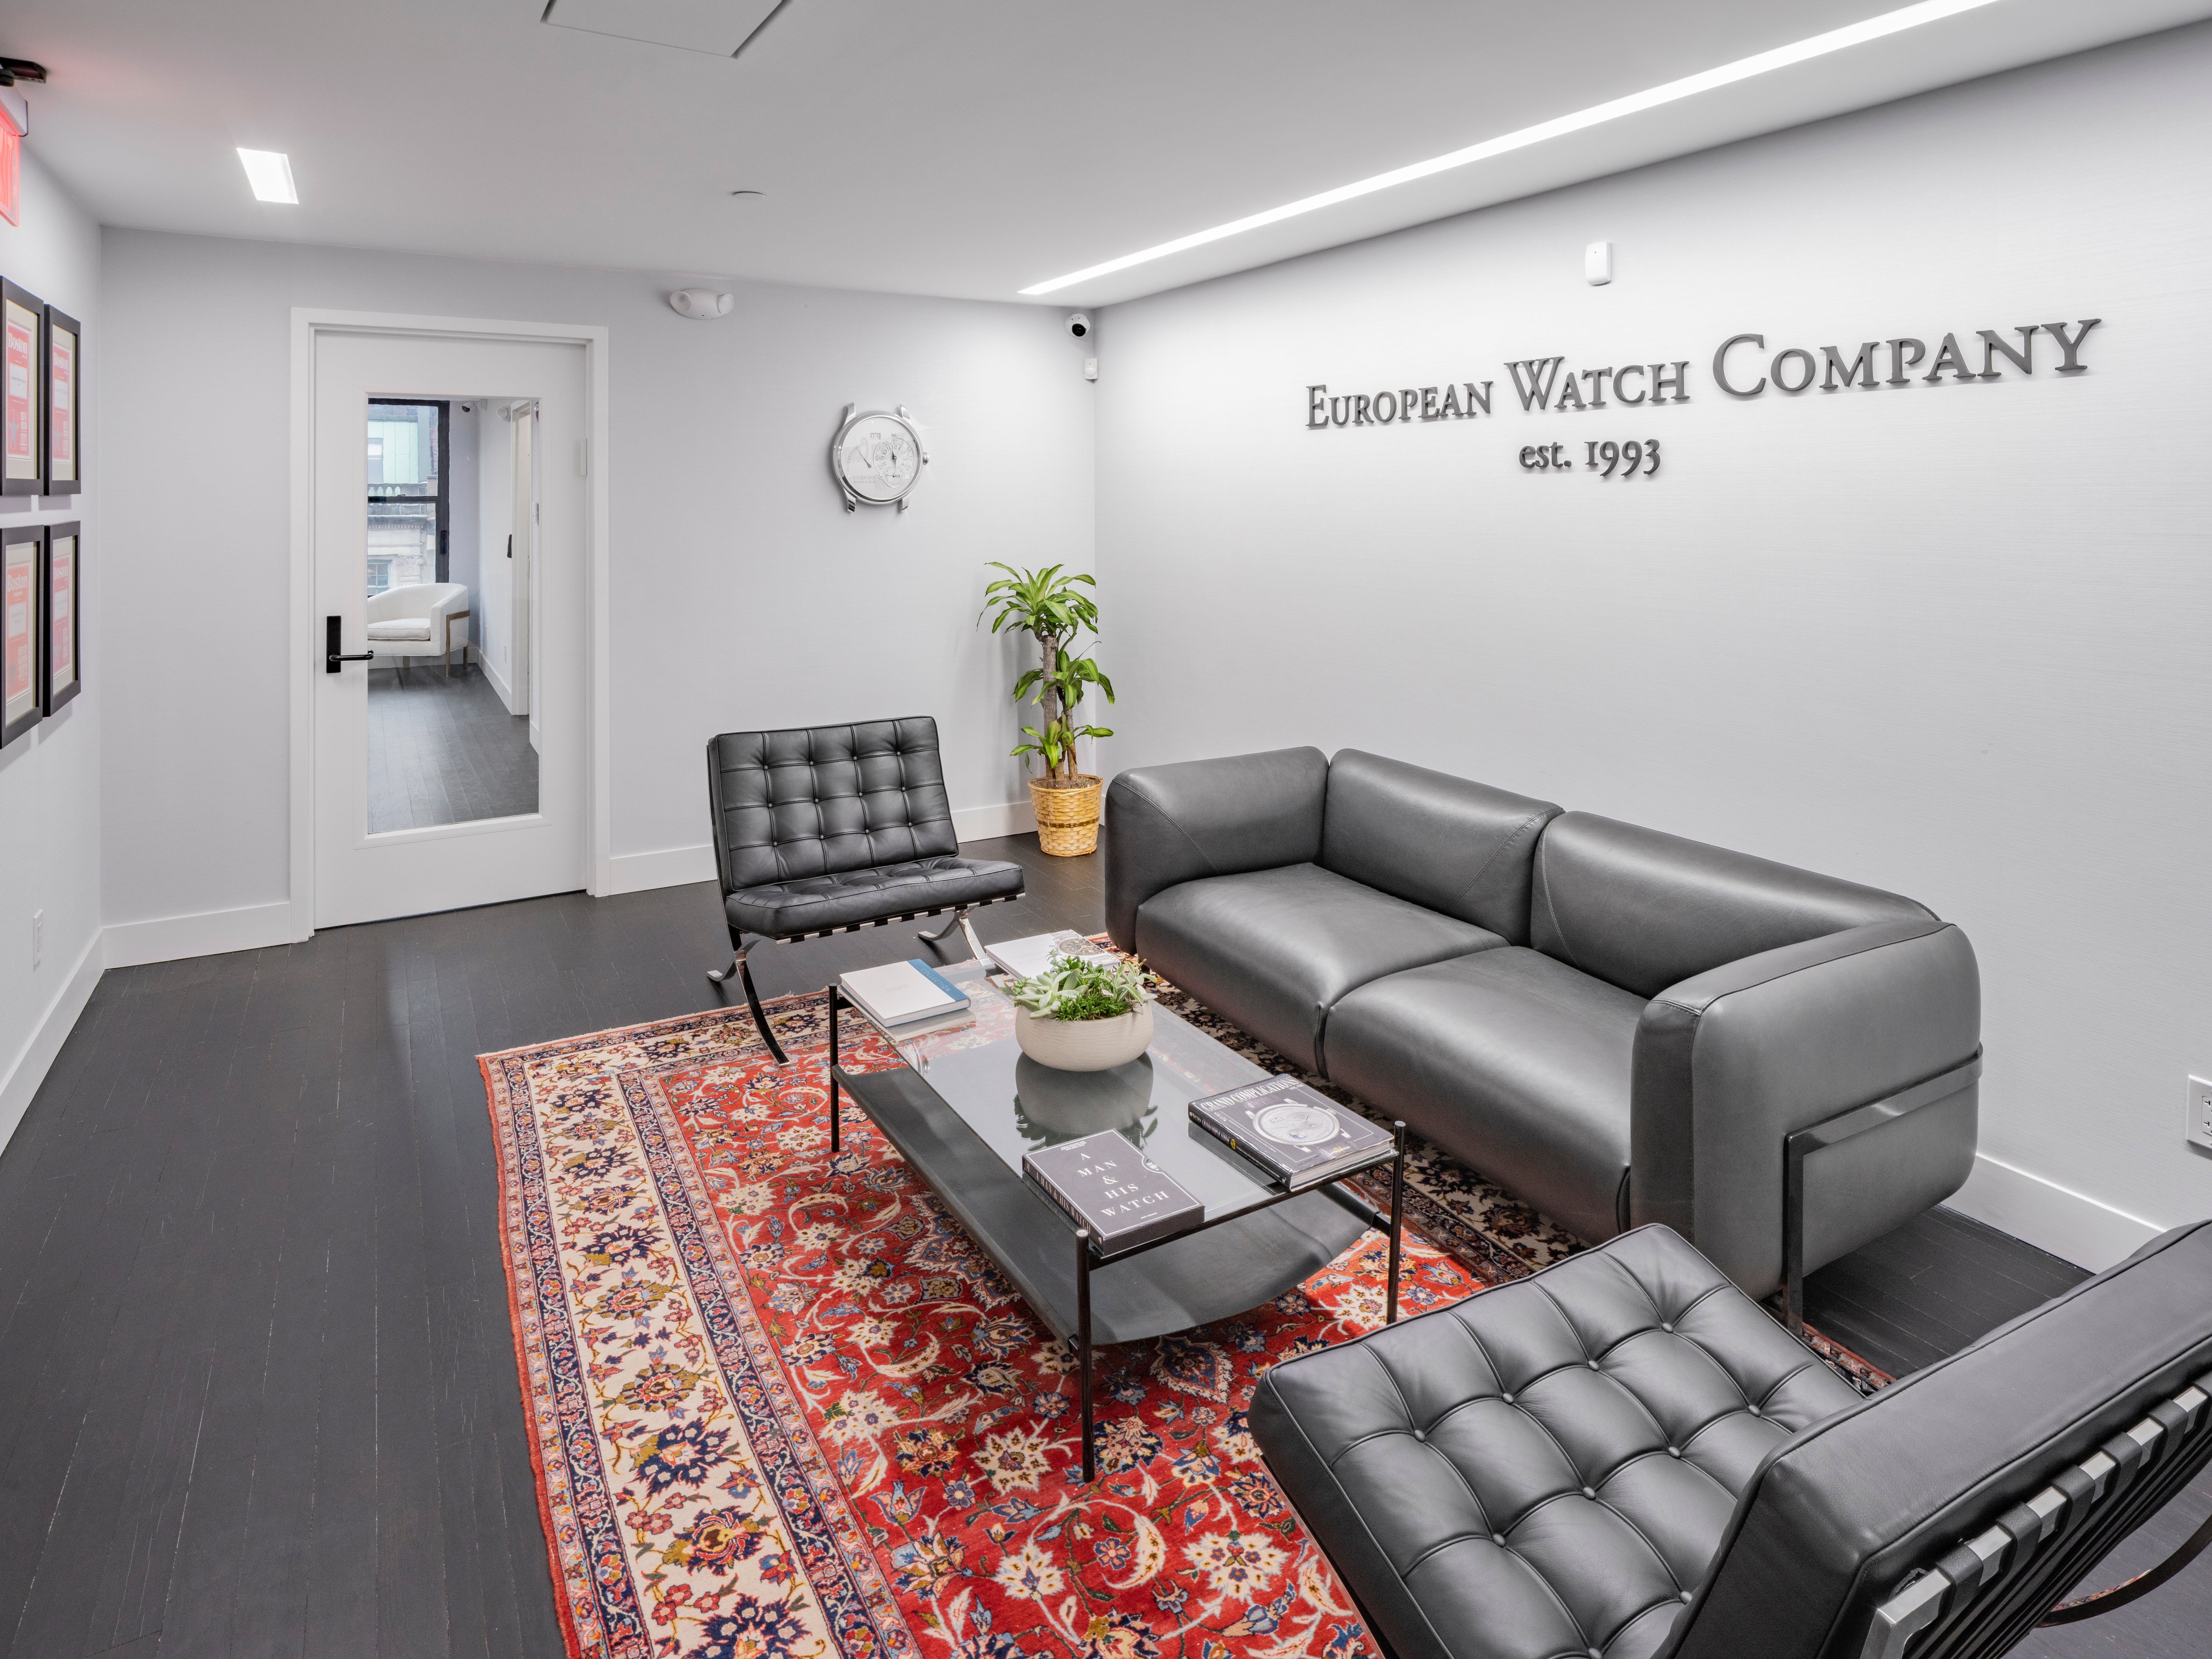 Interior of European Watch Company, lounge area, 3 love seats, oriental area rug with glass coffee table with  plants, books, with "European Watch Company est. 1993" on the wall behind center love seat, plants in the corner, angle shows clock, wall decor, and glass door as entrance